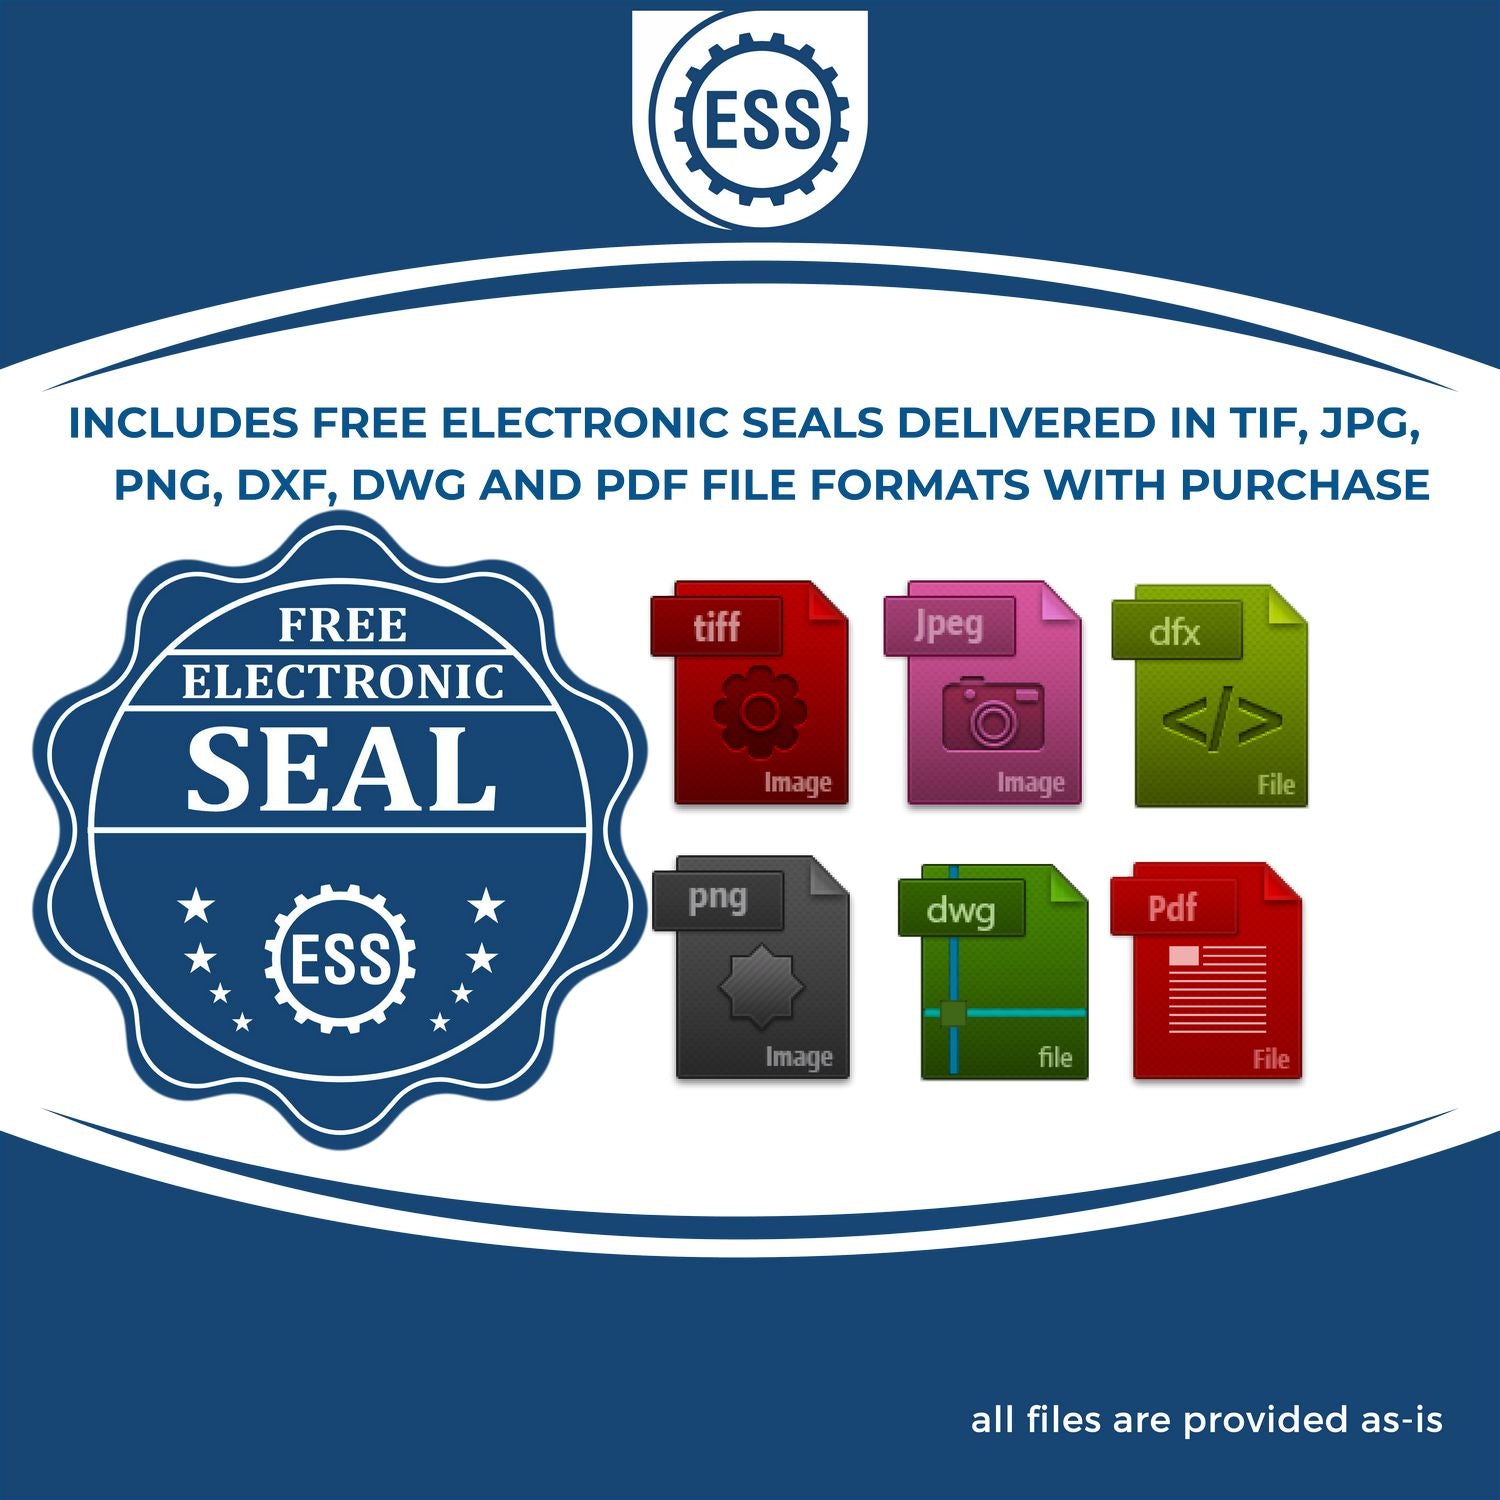 An infographic for the free electronic seal for the Slim Pre-Inked Arkansas Architect Seal Stamp illustrating the different file type icons such as DXF, DWG, TIF, JPG and PNG.